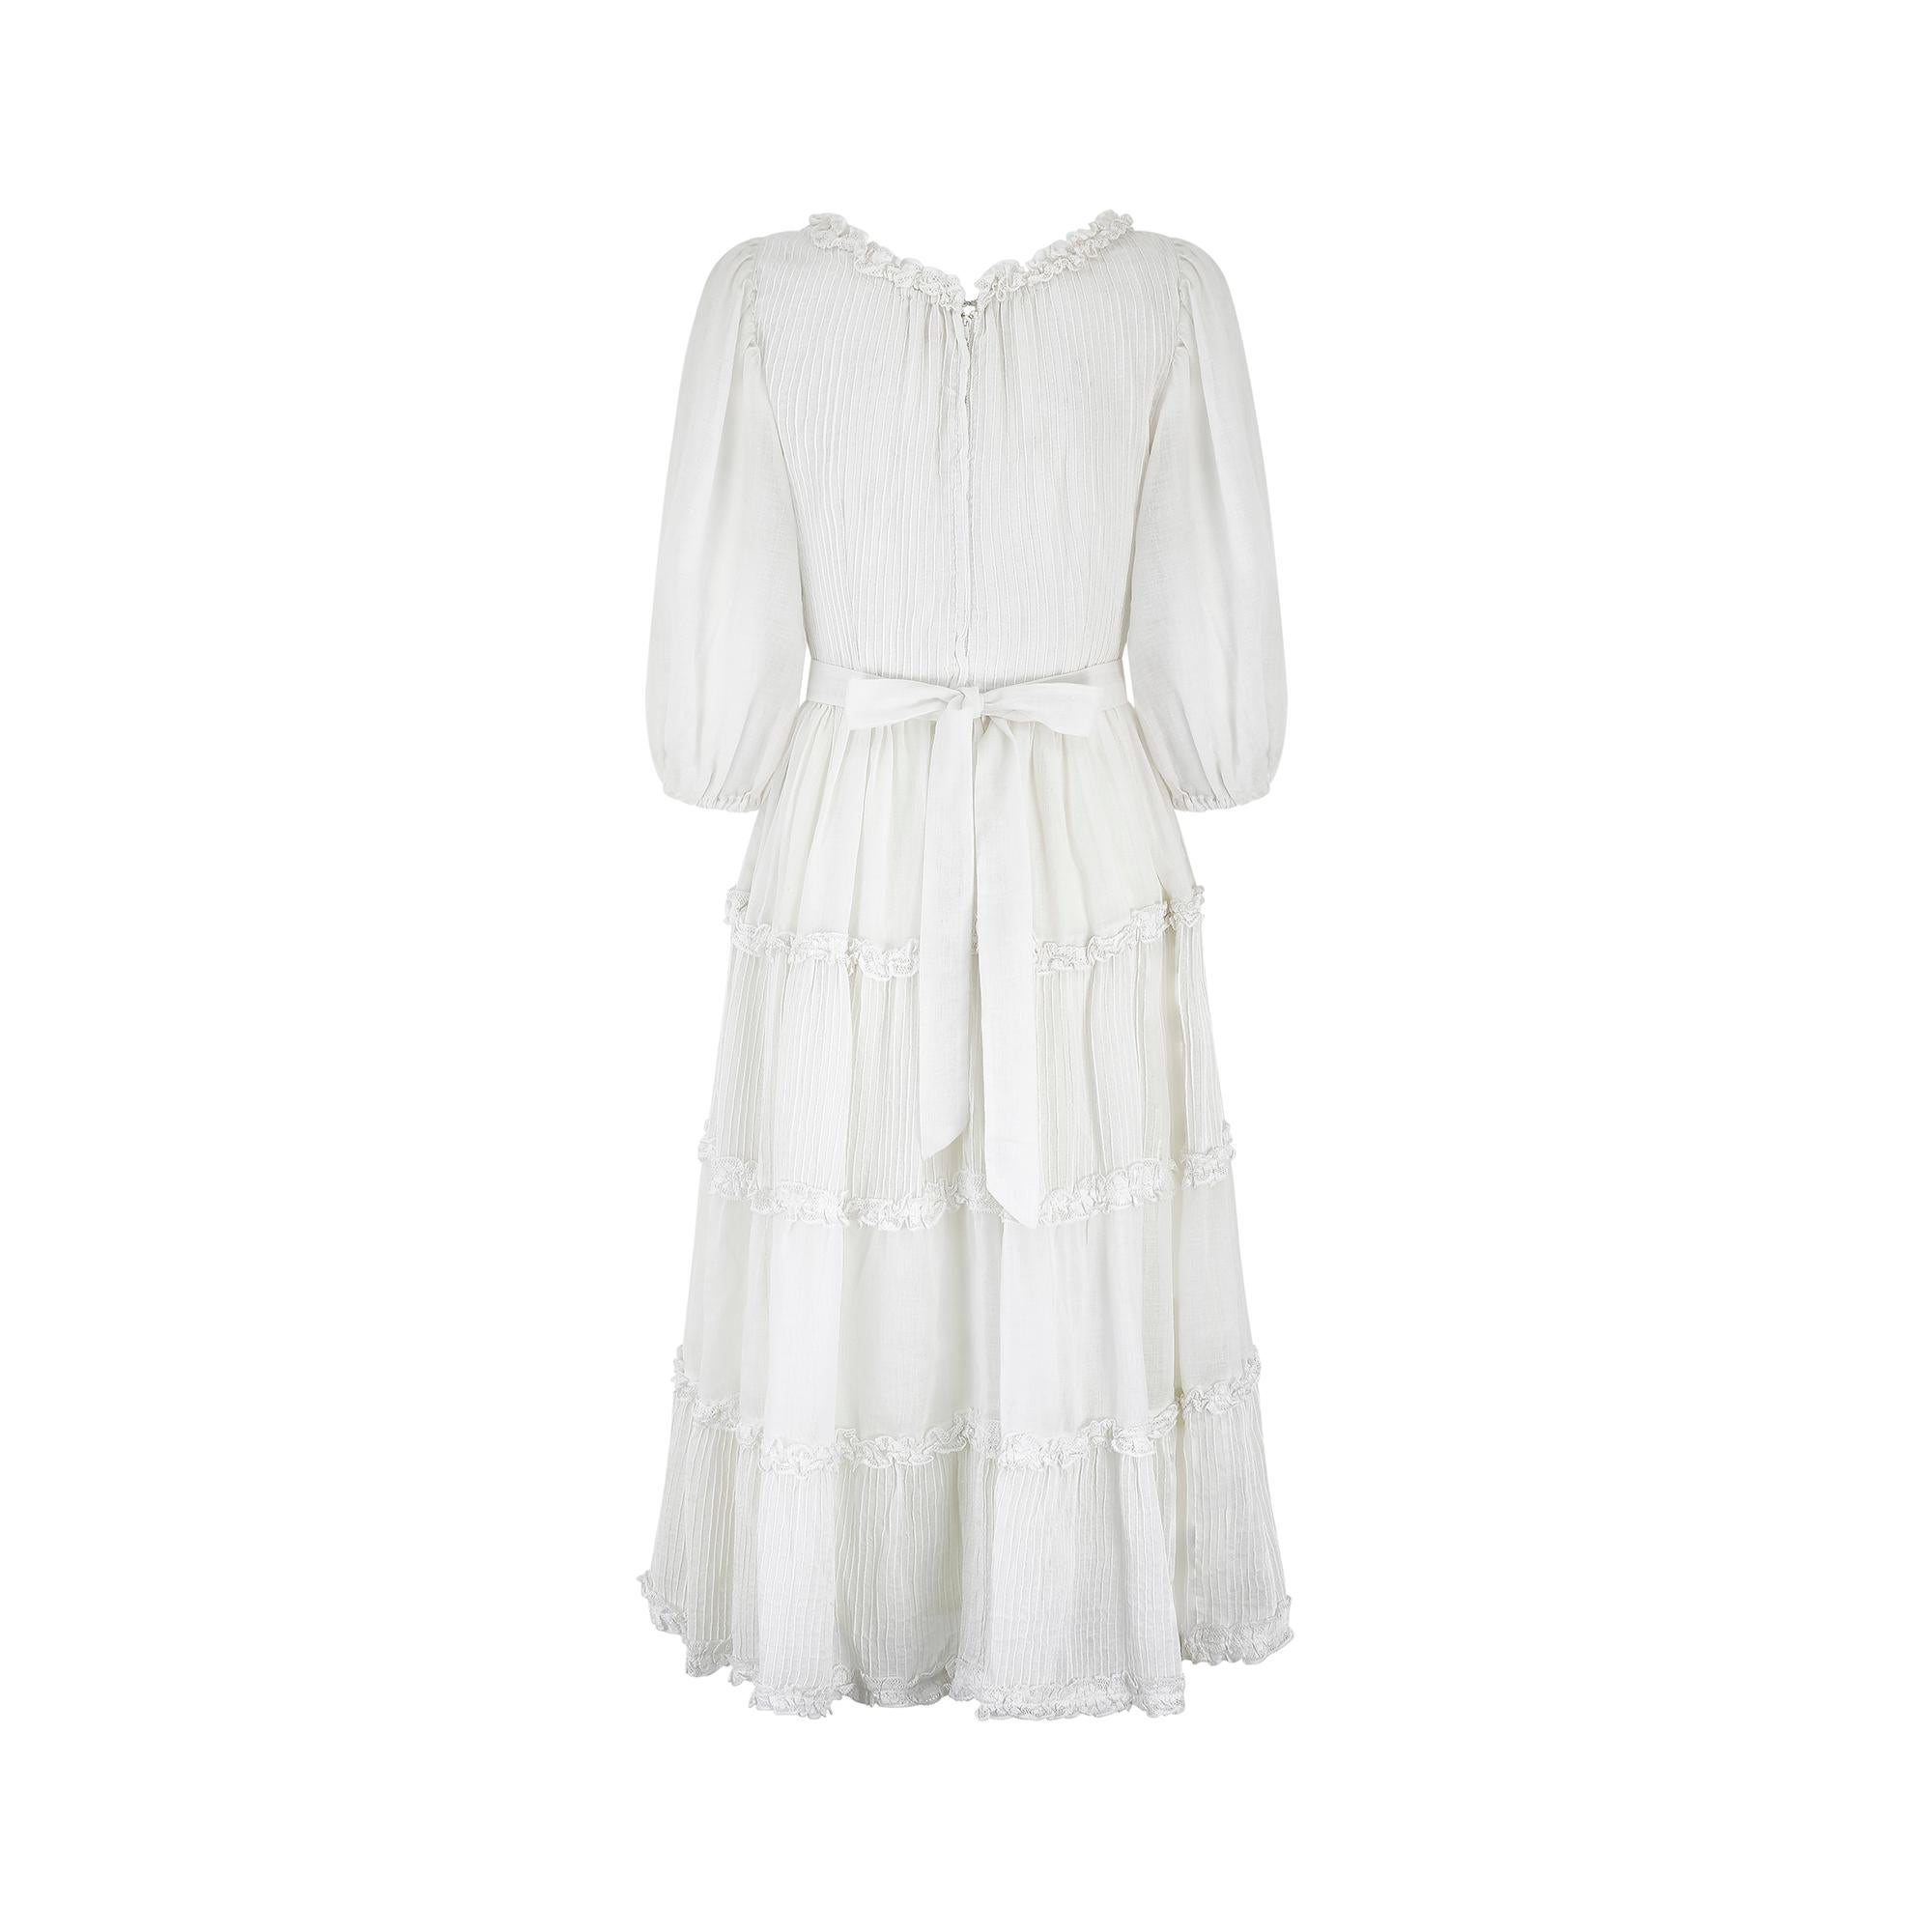 1970s Rodemex Mexican White Cotton Wedding Dress In Excellent Condition For Sale In London, GB